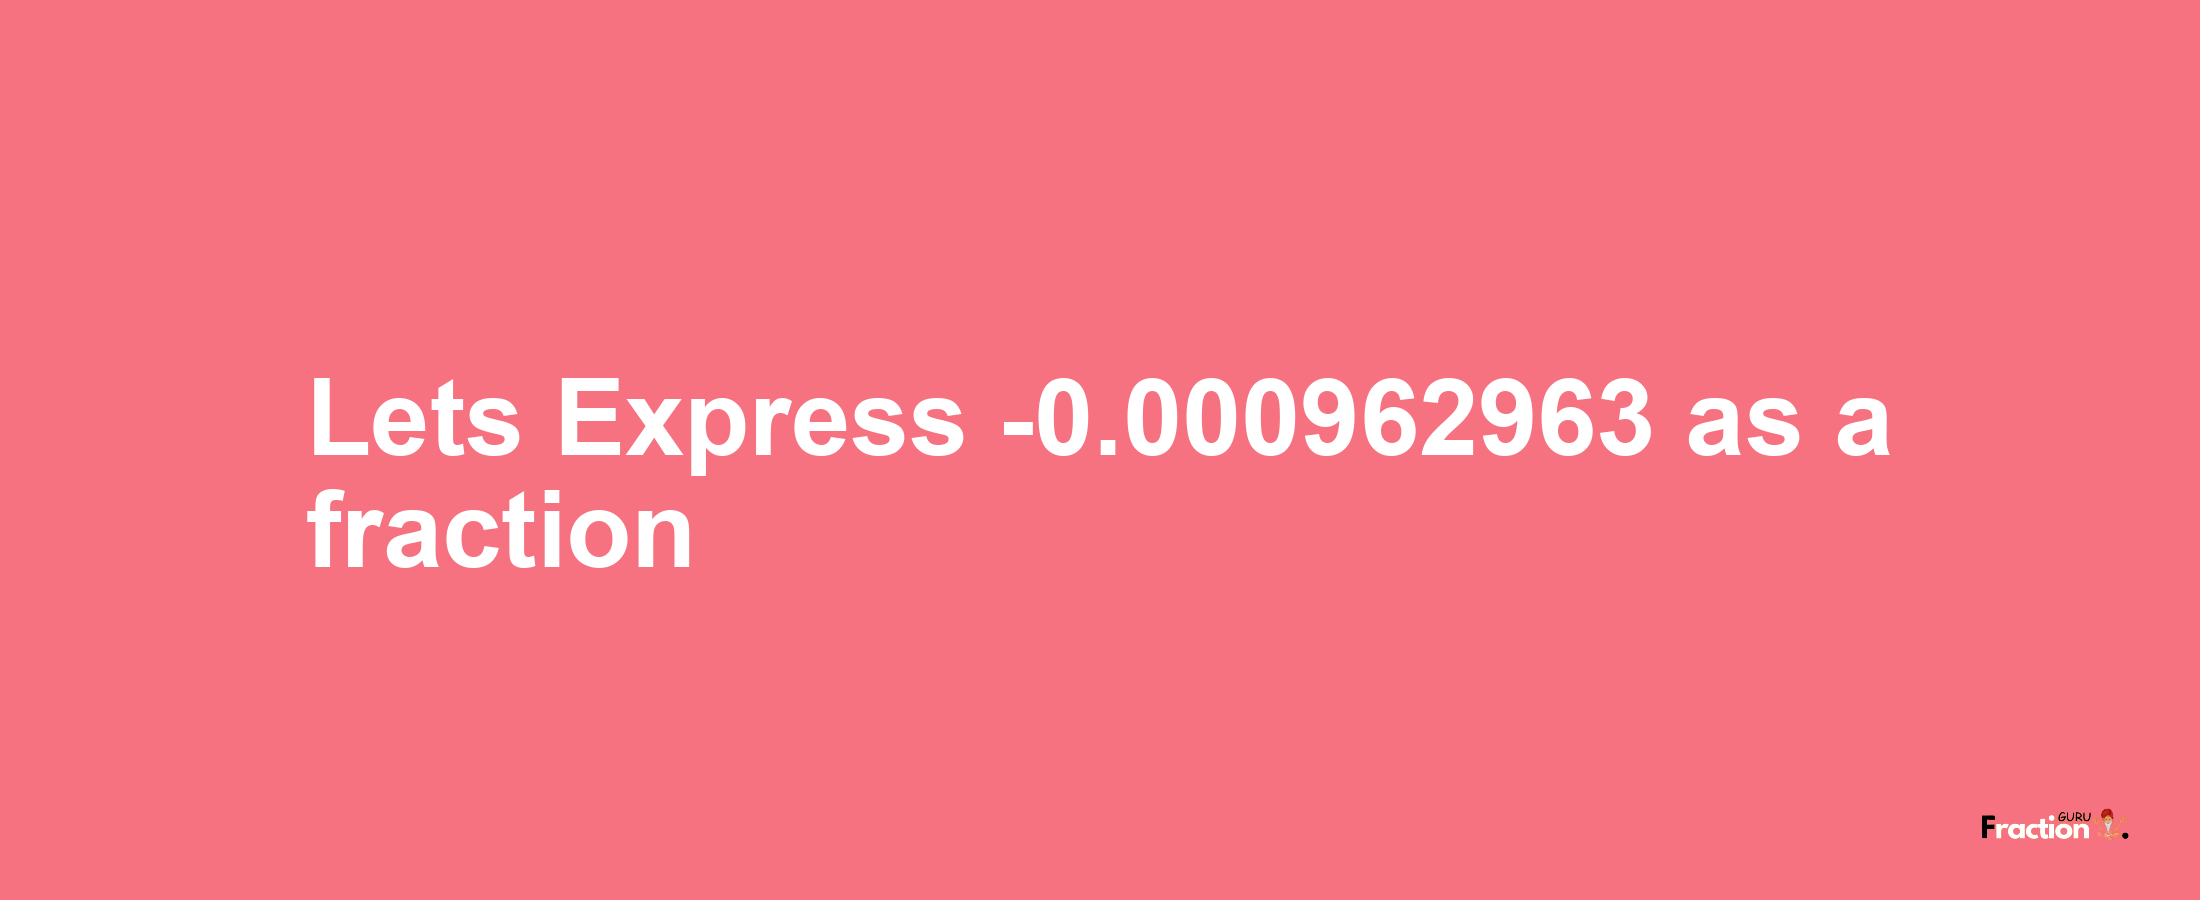 Lets Express -0.000962963 as afraction